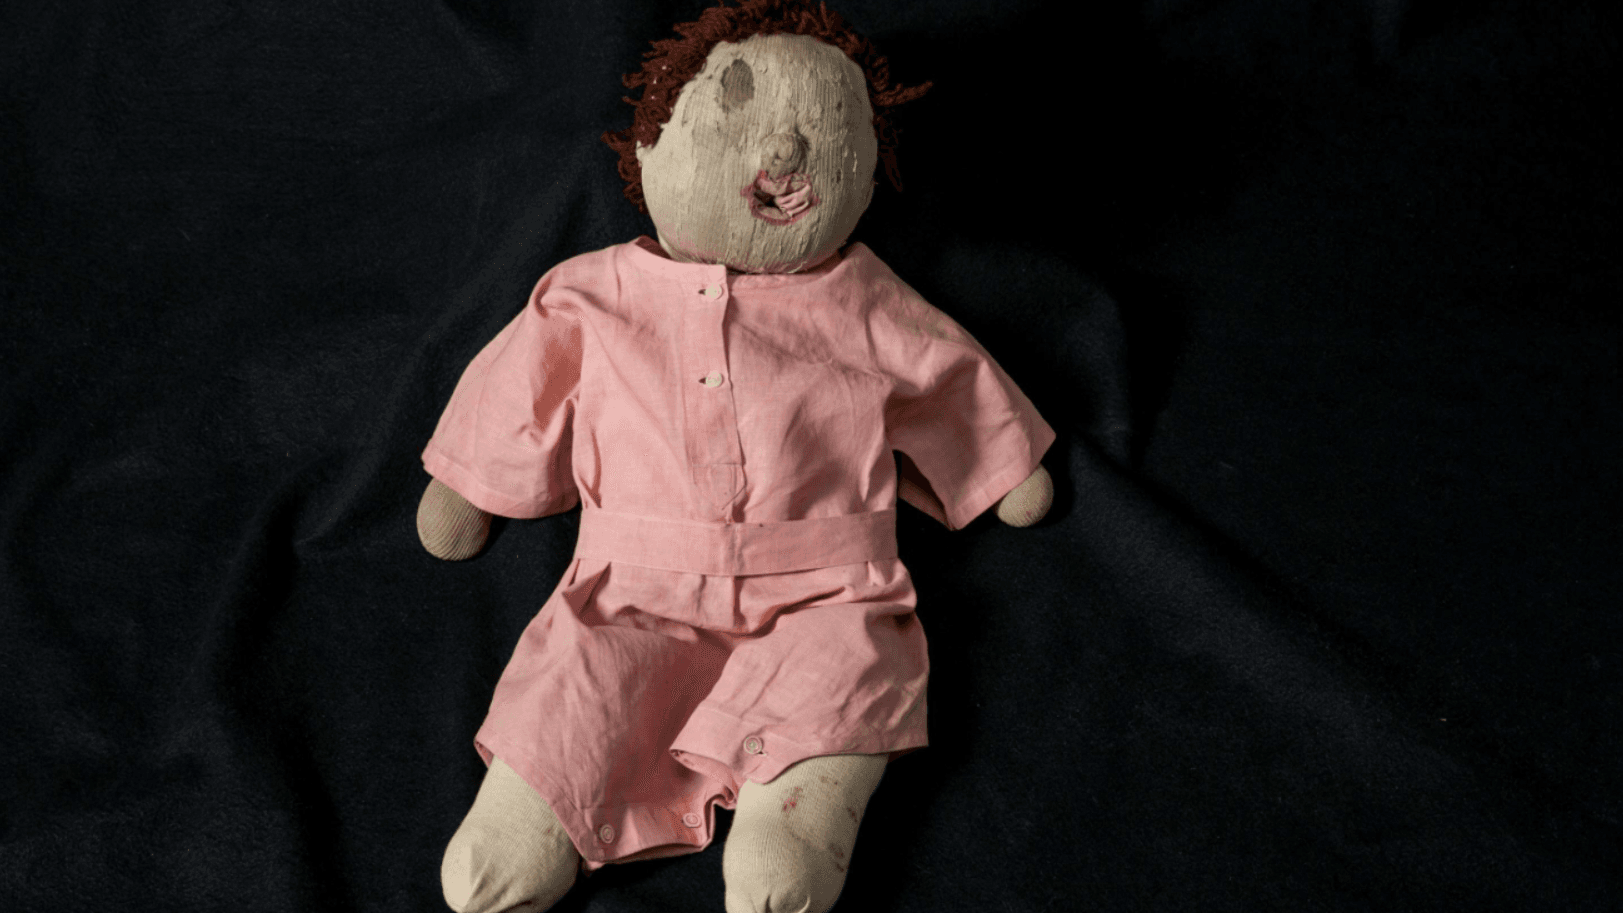 A photograph of a raggedy doll with no eyes in a pink dress